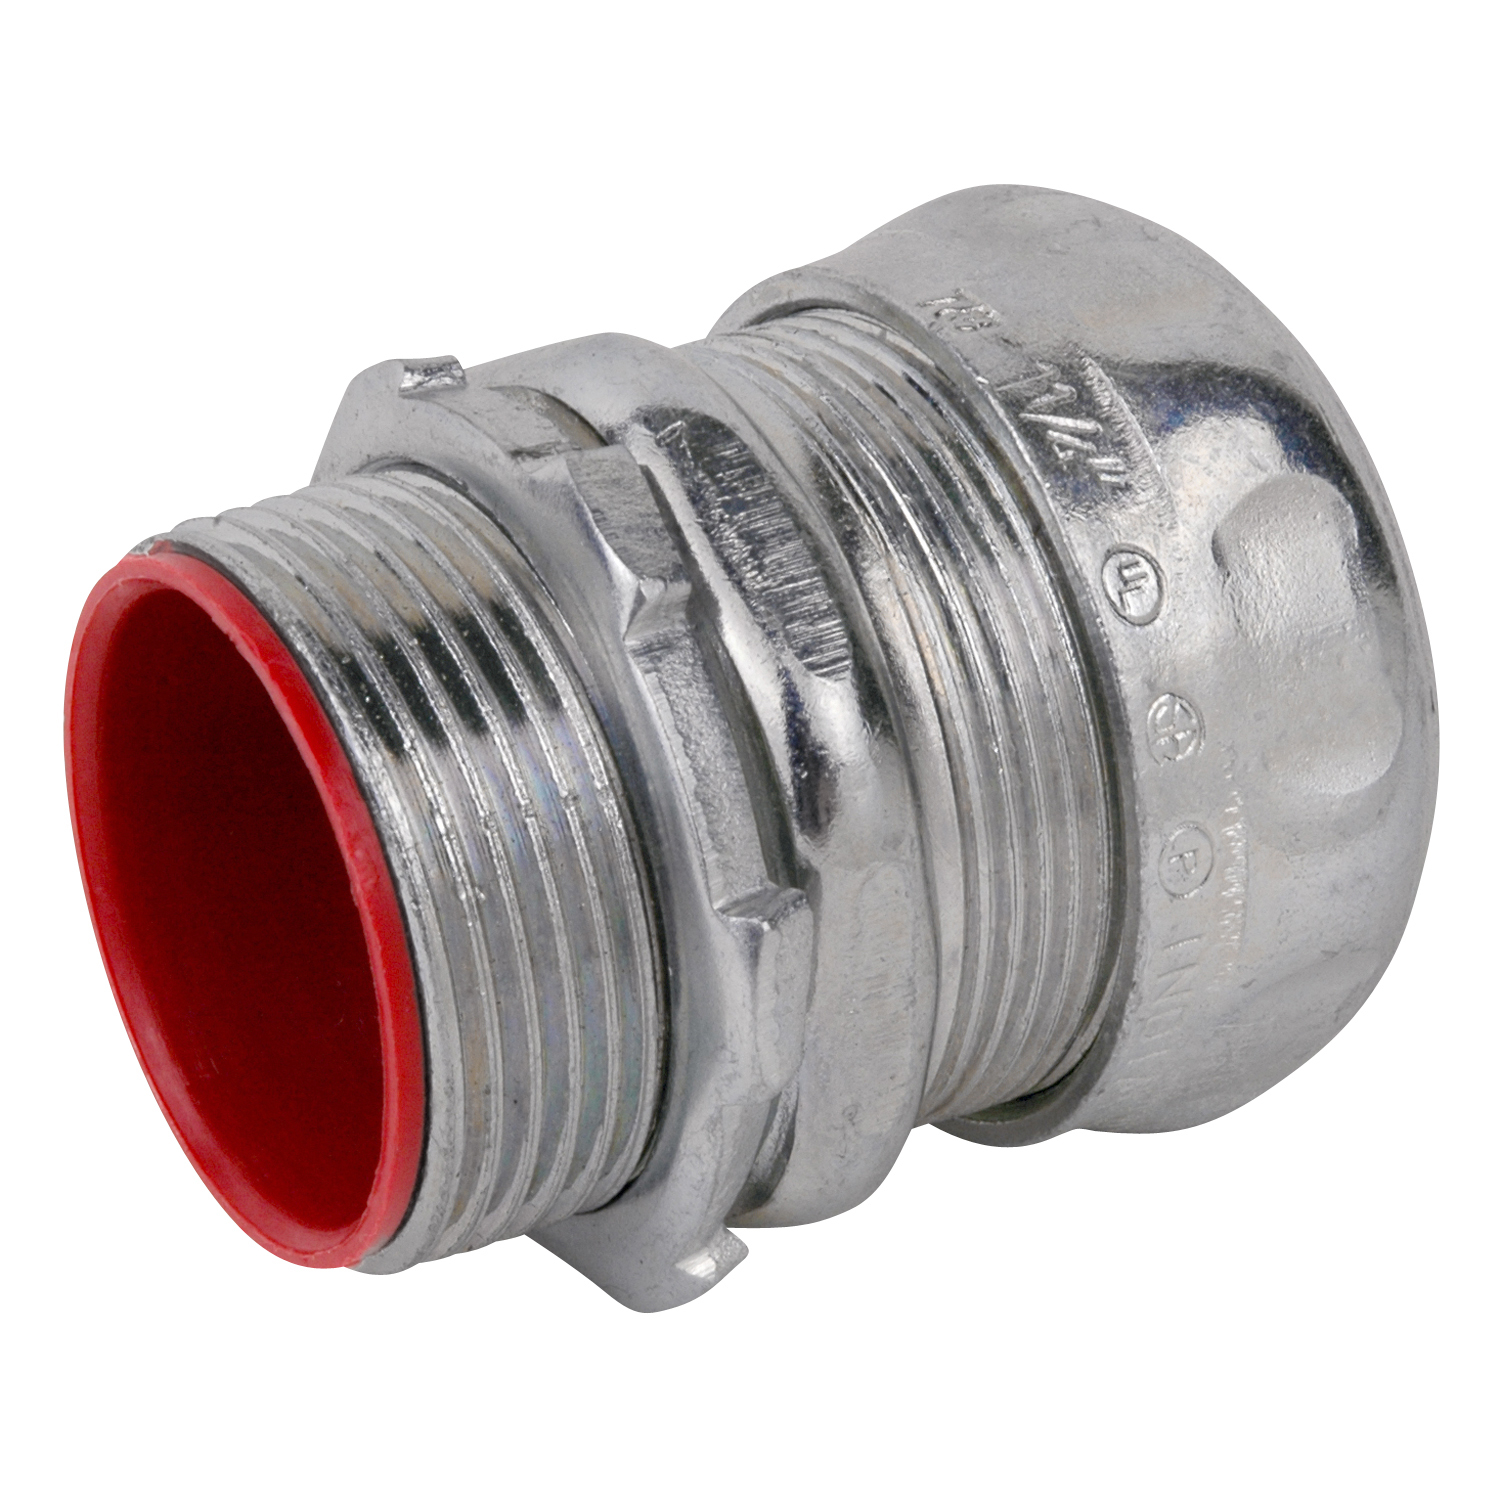 Thomas & Betts TC714A Steel City Compression Connector